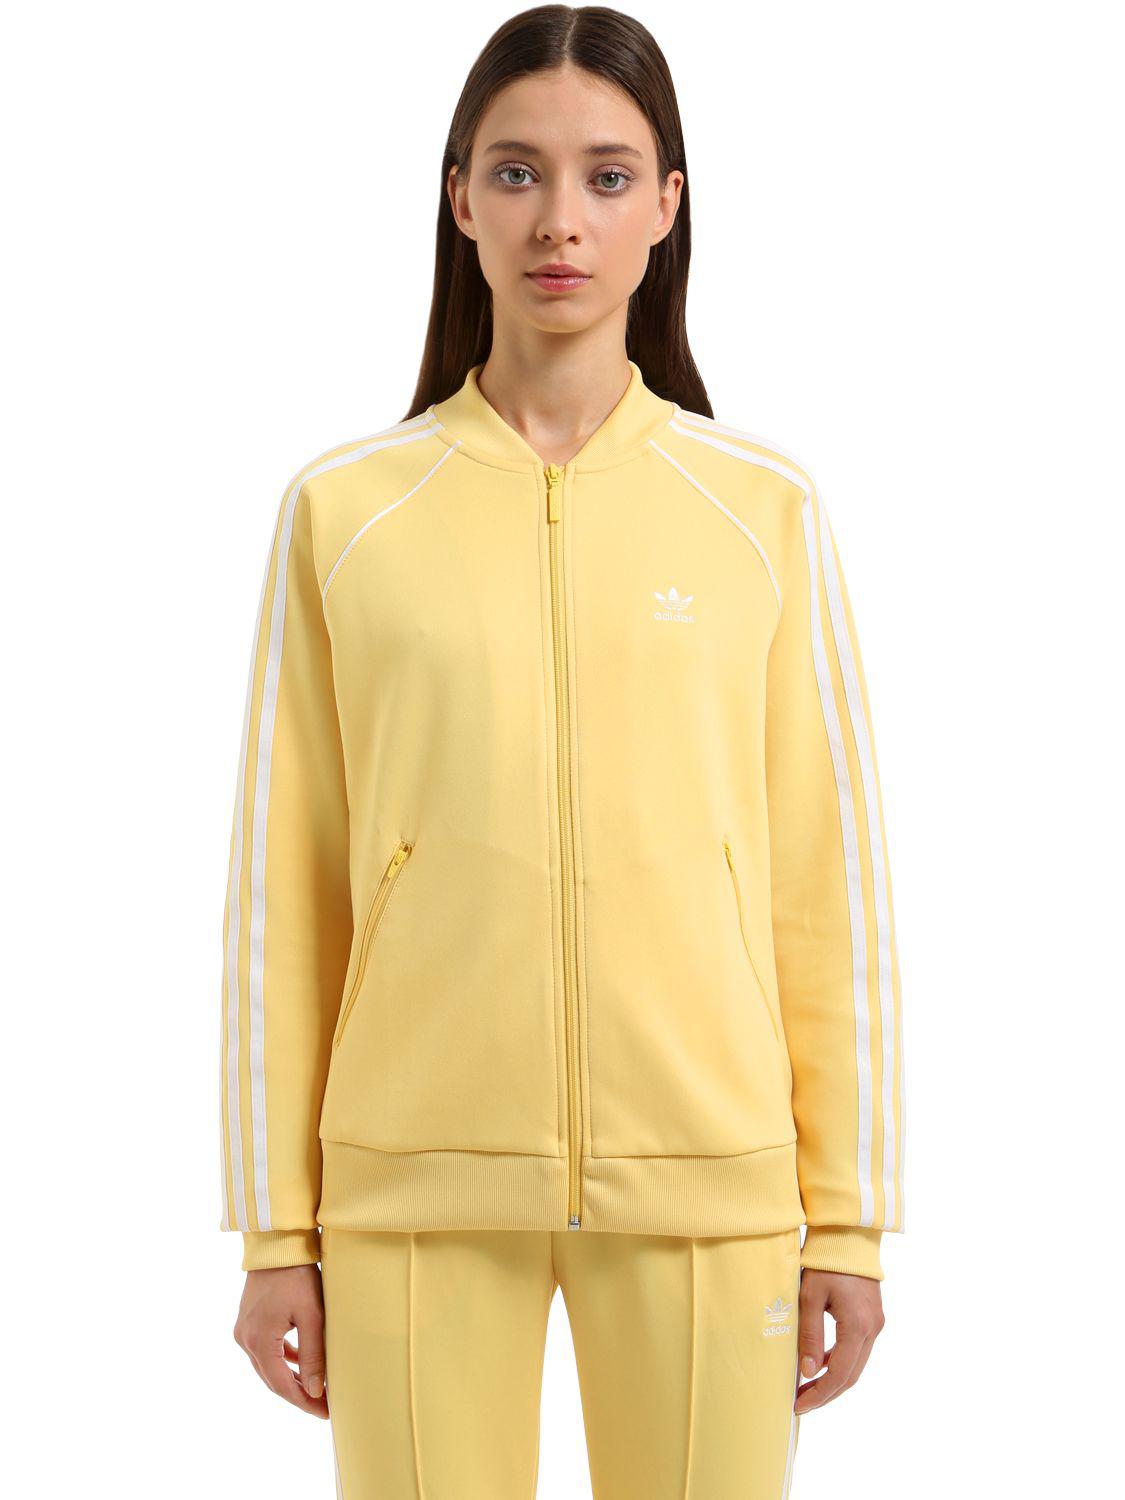 blue and yellow adidas tracksuit